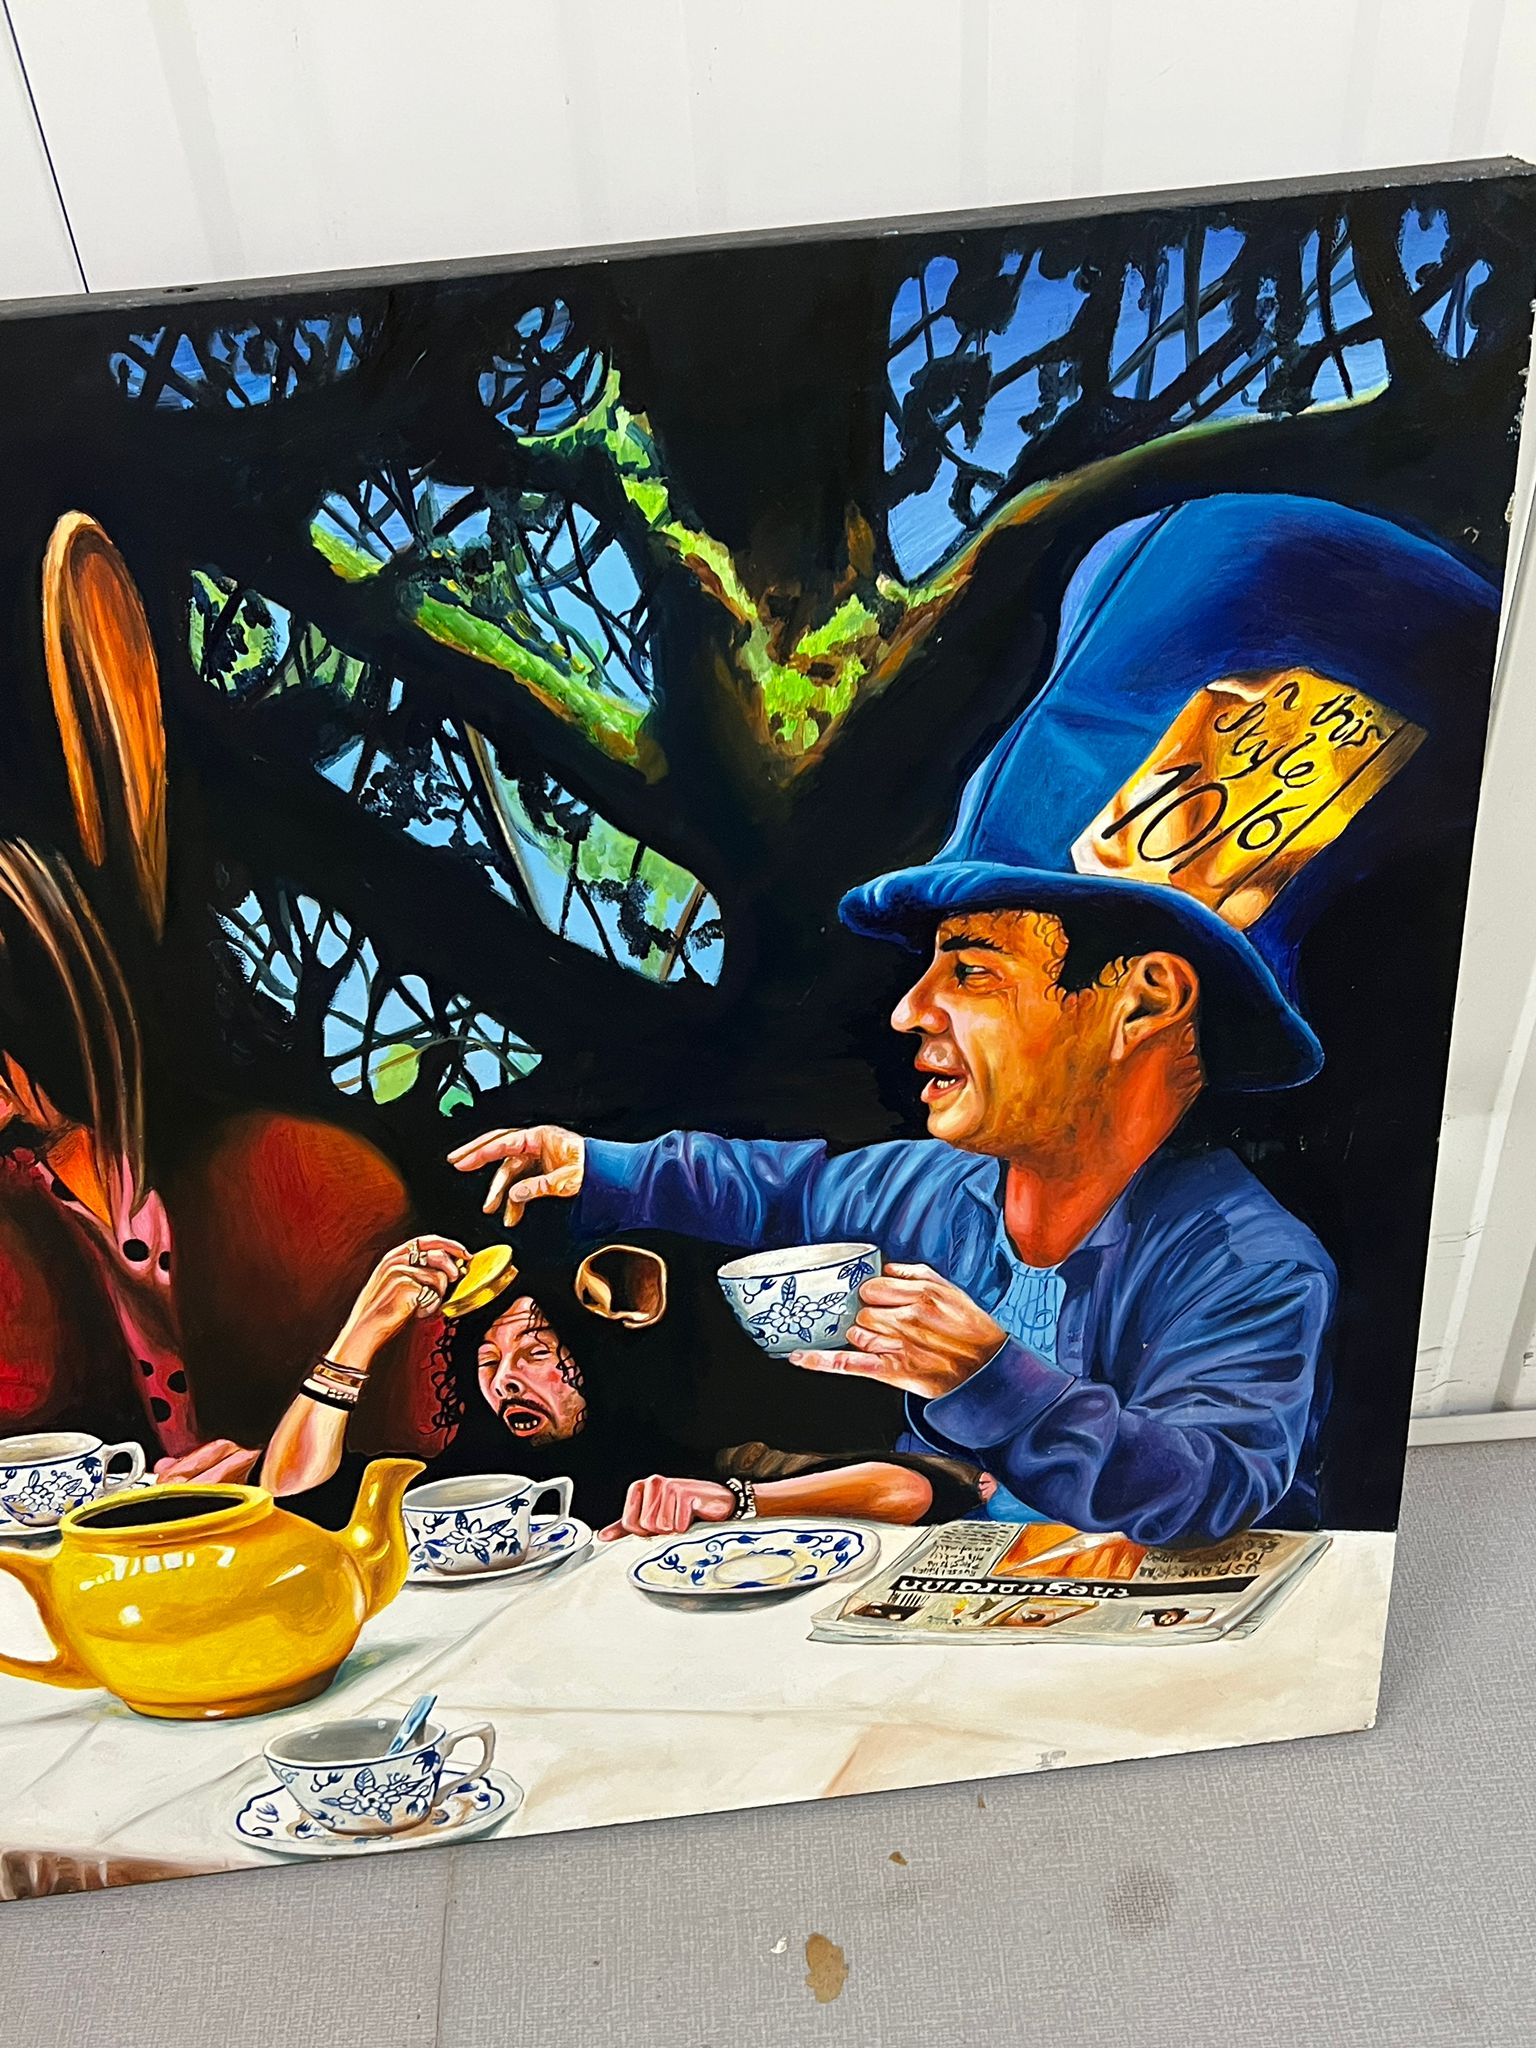 Neil Thomas Roberts 'Little Alice & a band of peculiar fellows' oil on wood 100cm x 70cm (2006) - Image 3 of 5